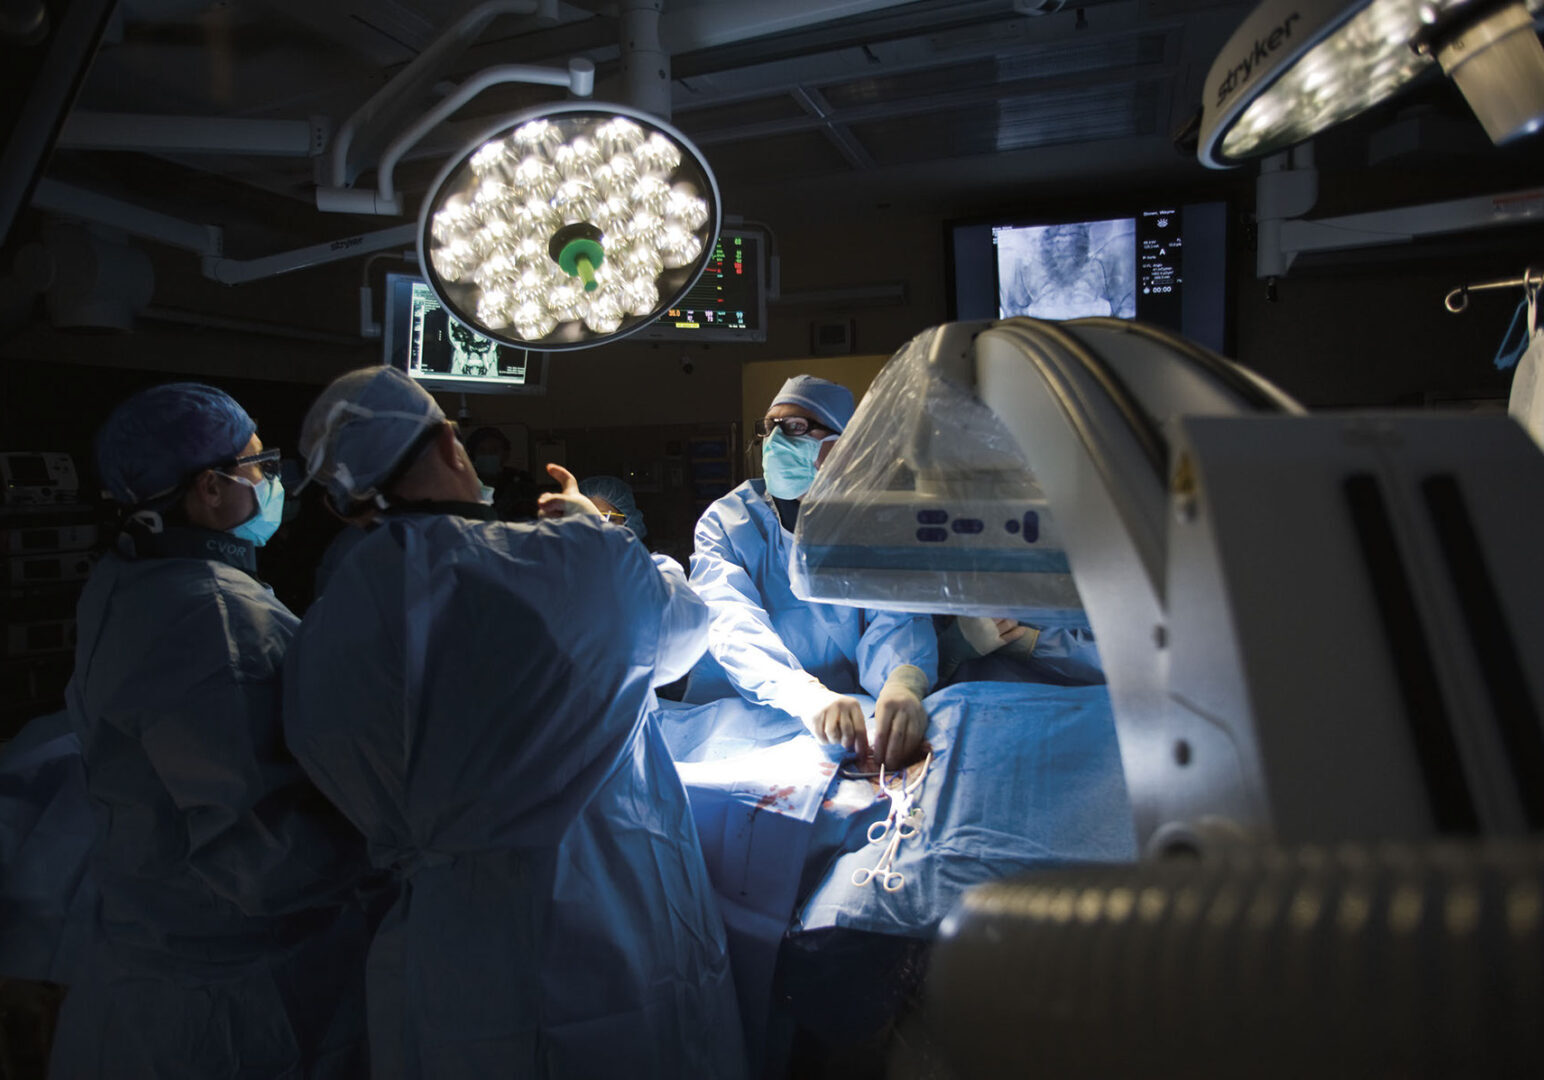 Vascular surgeons perform an abdominal aortic aneurysm repair procedure in the hybrid Cardiovascular Operating Room, located at the David Grant USAF Medical Center on Travis Air Force Base, Calif. U.S. Air Force photo/Tech. Sgt. Bennie J. Davis III)